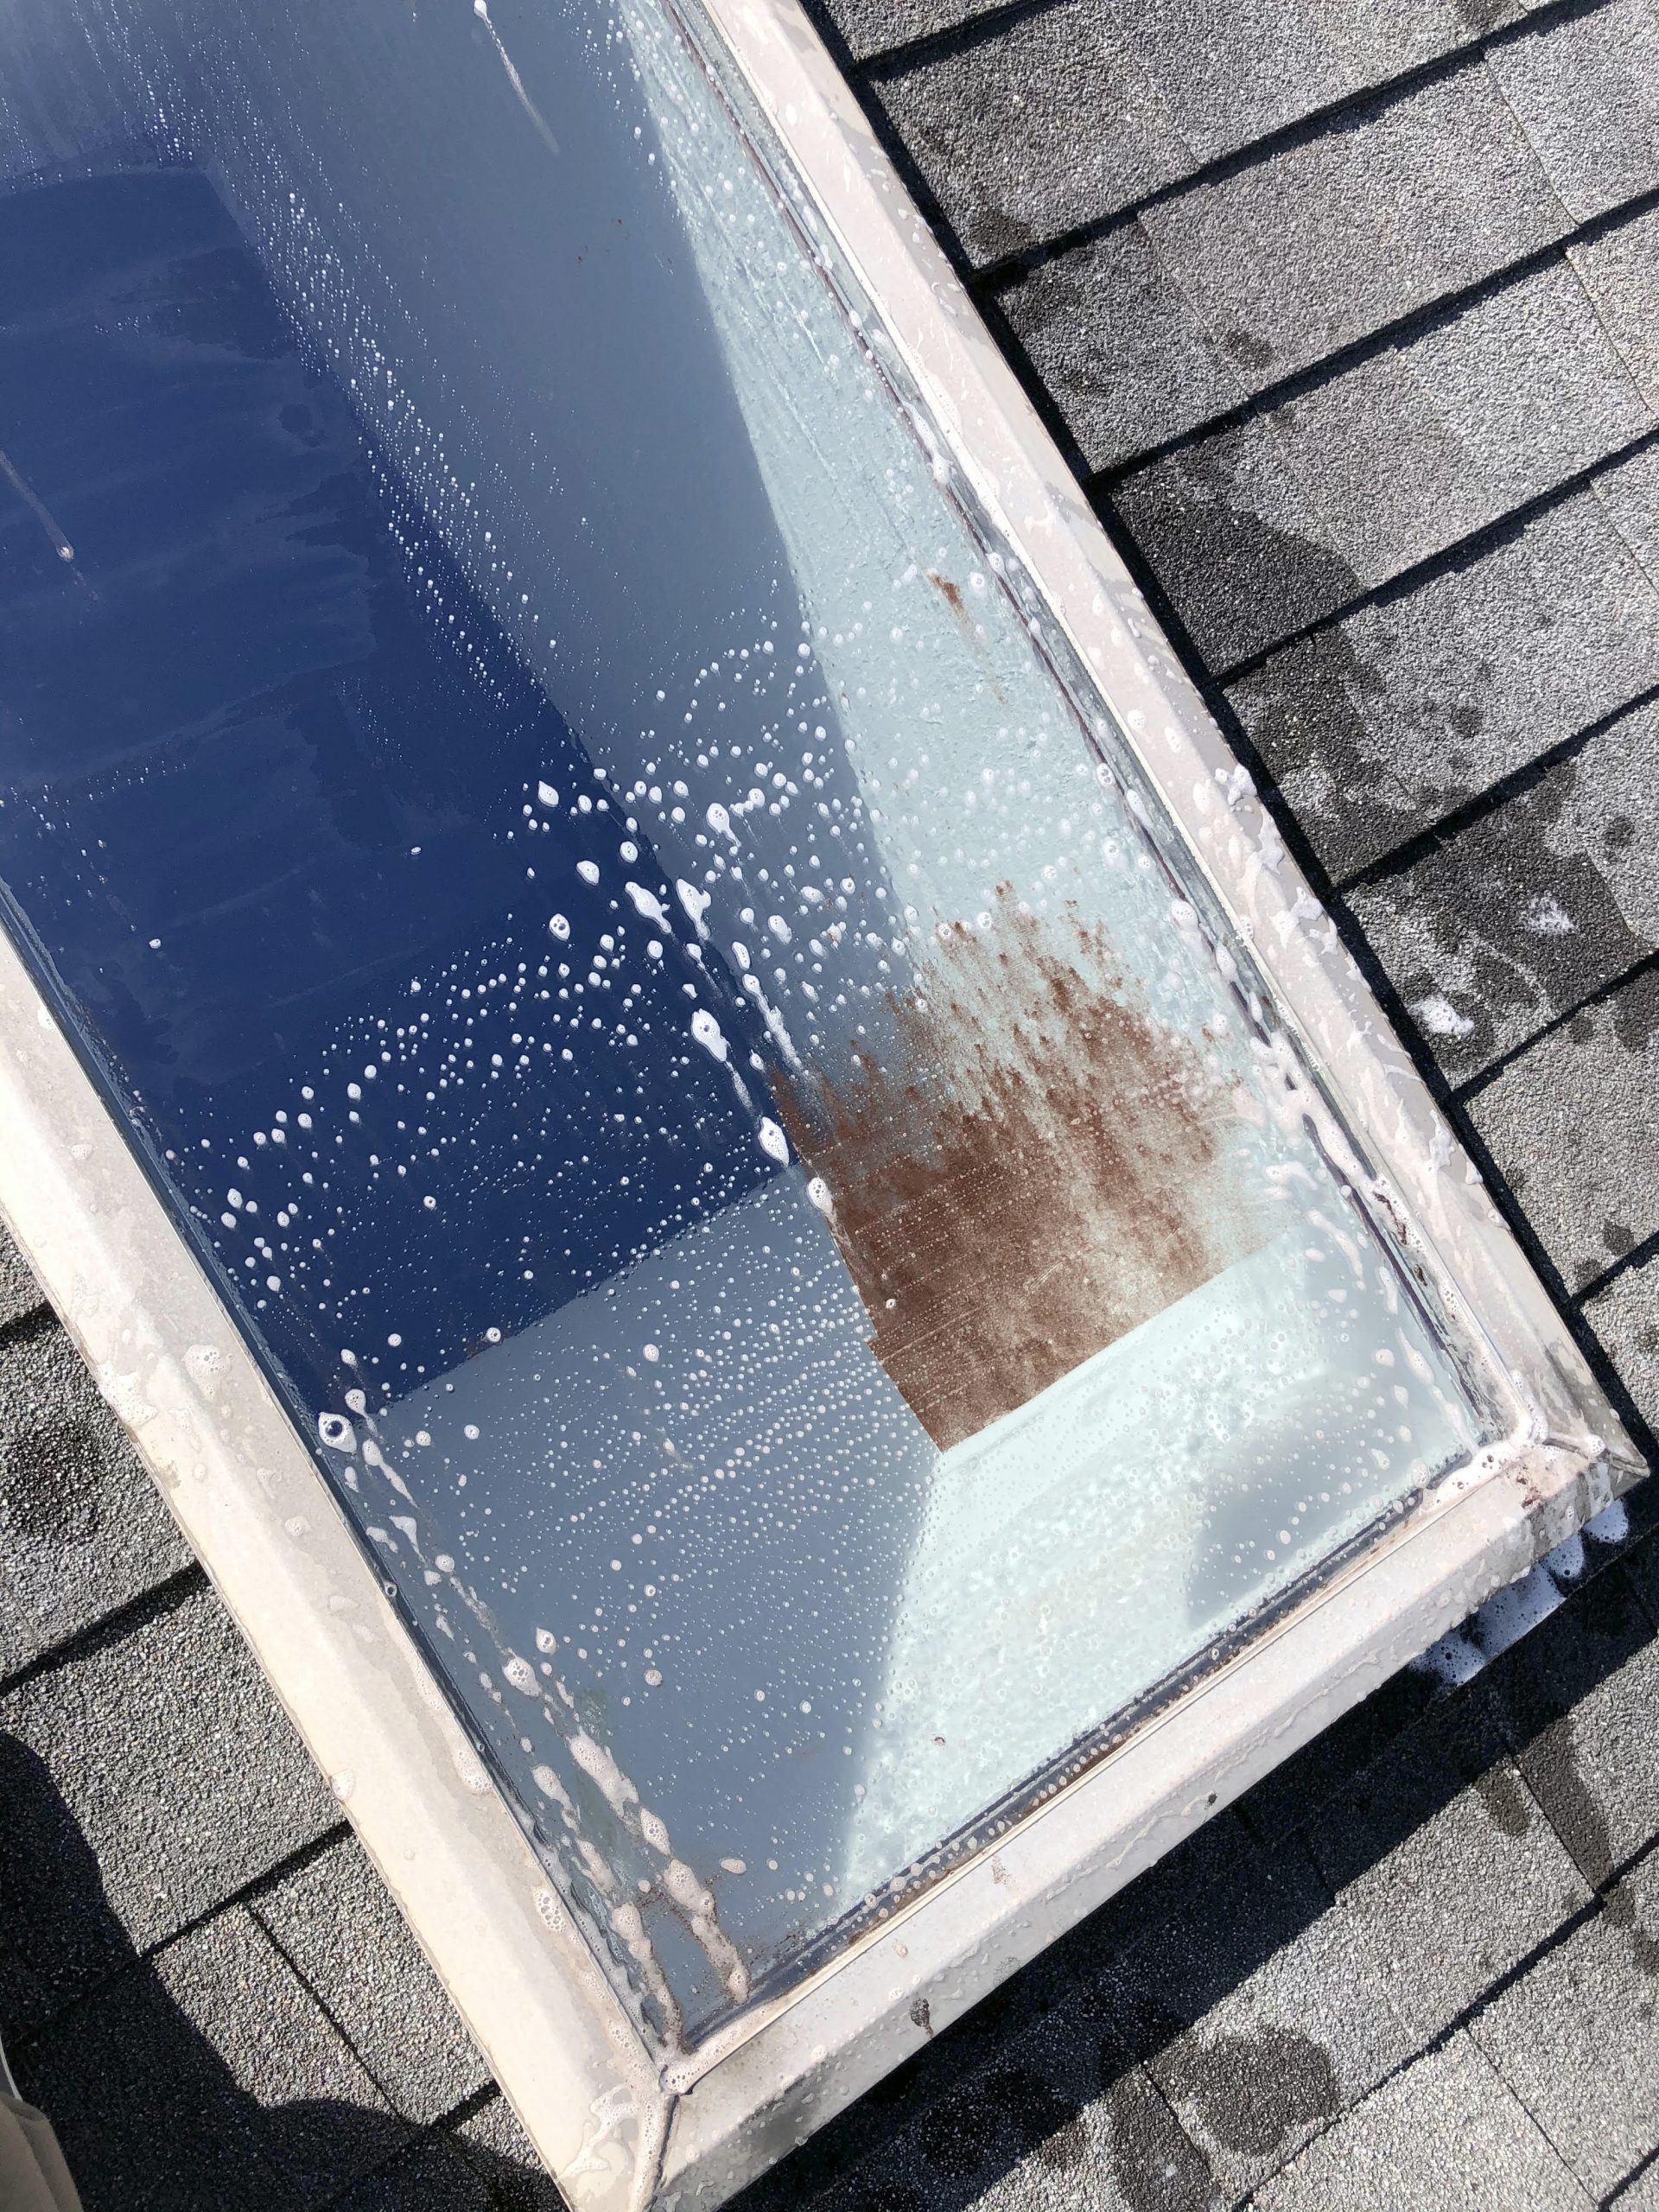 Skylight Cleaning